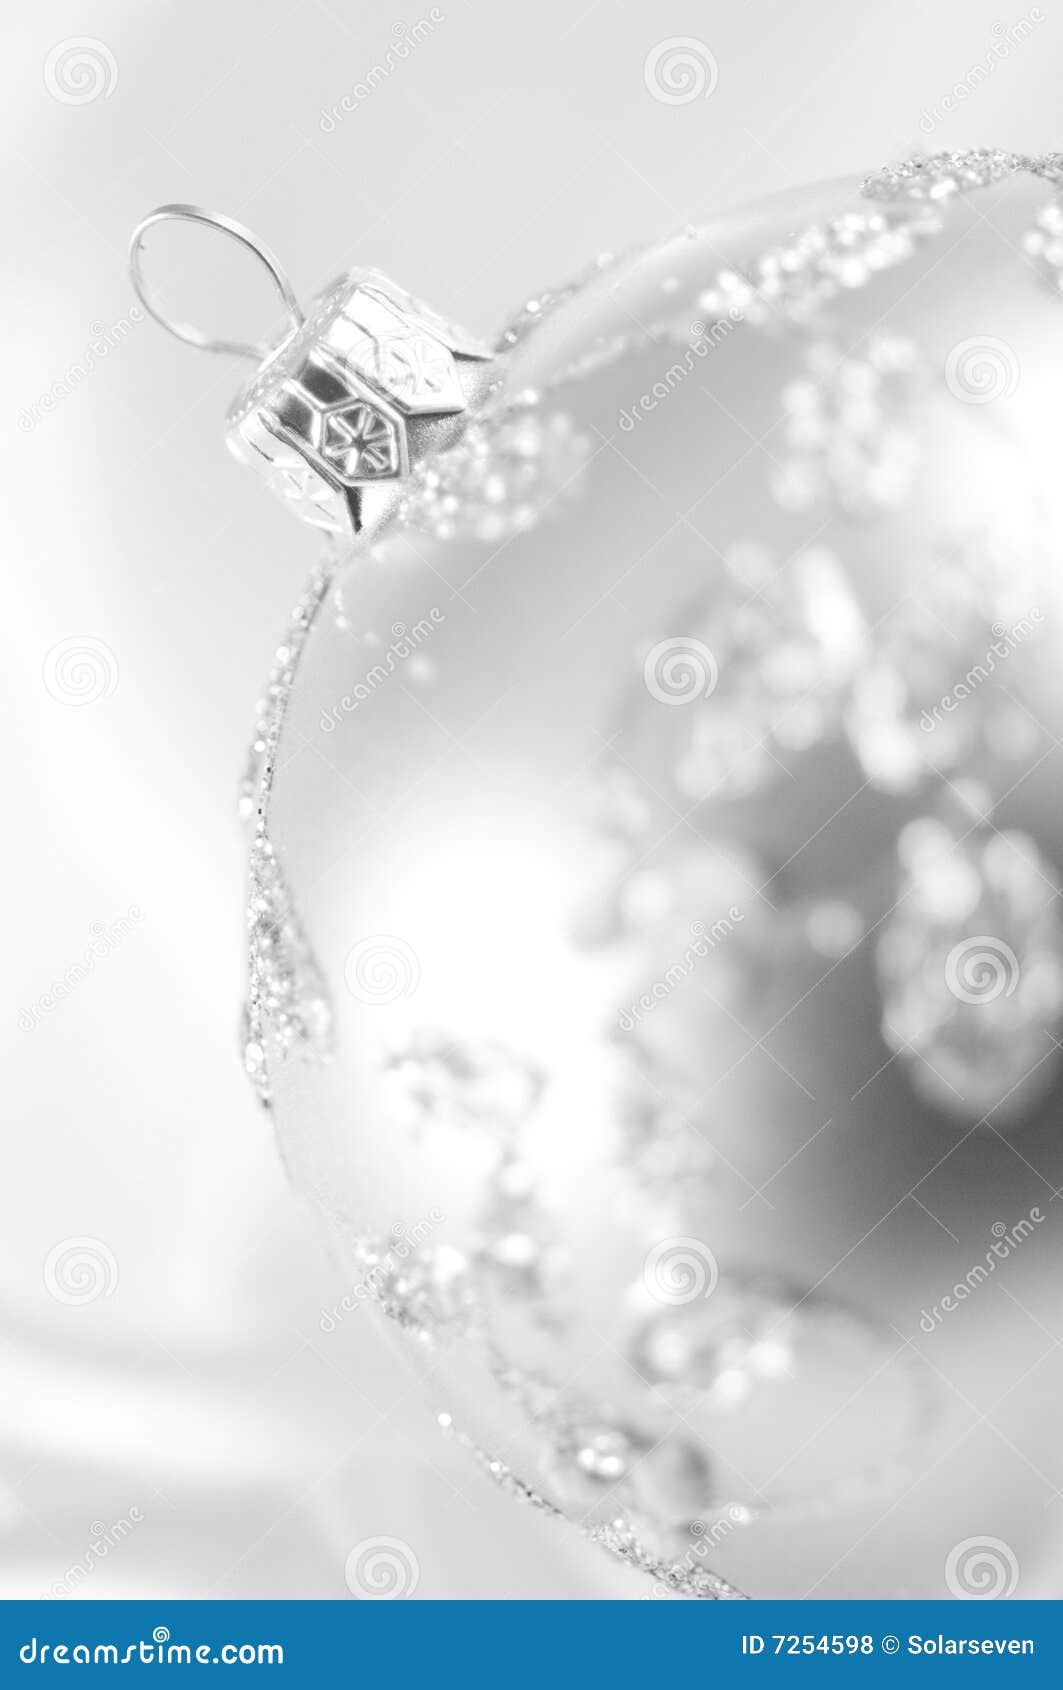 Silver Christmas Bauble stock photo. Image of background - 7254598